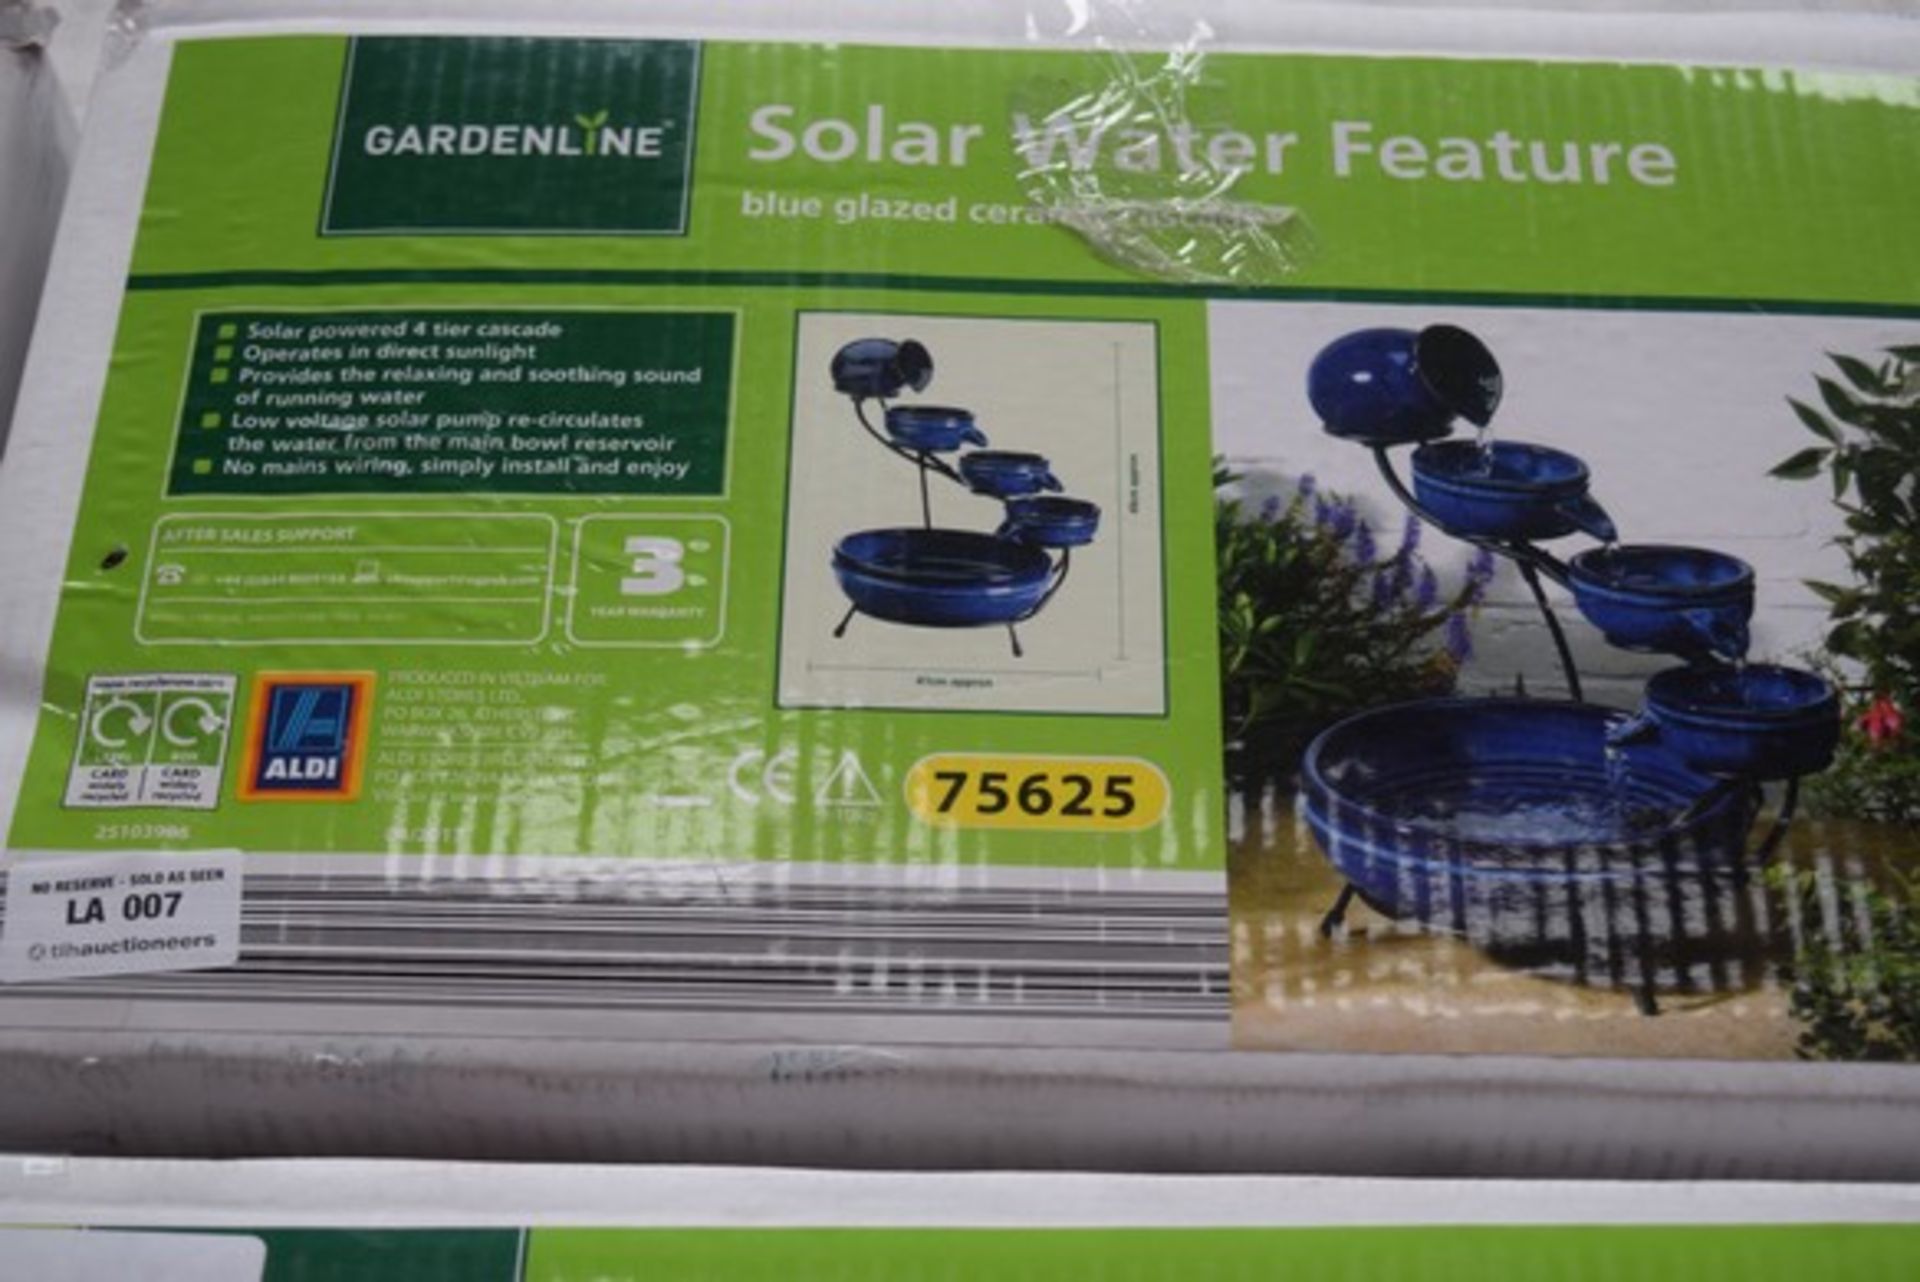 1 x BOXED GARDEN LINES SOLAR WATER FEATURE RRP £50 16.06.17 *PLEASE NOTE THAT THE BID PRICE IS